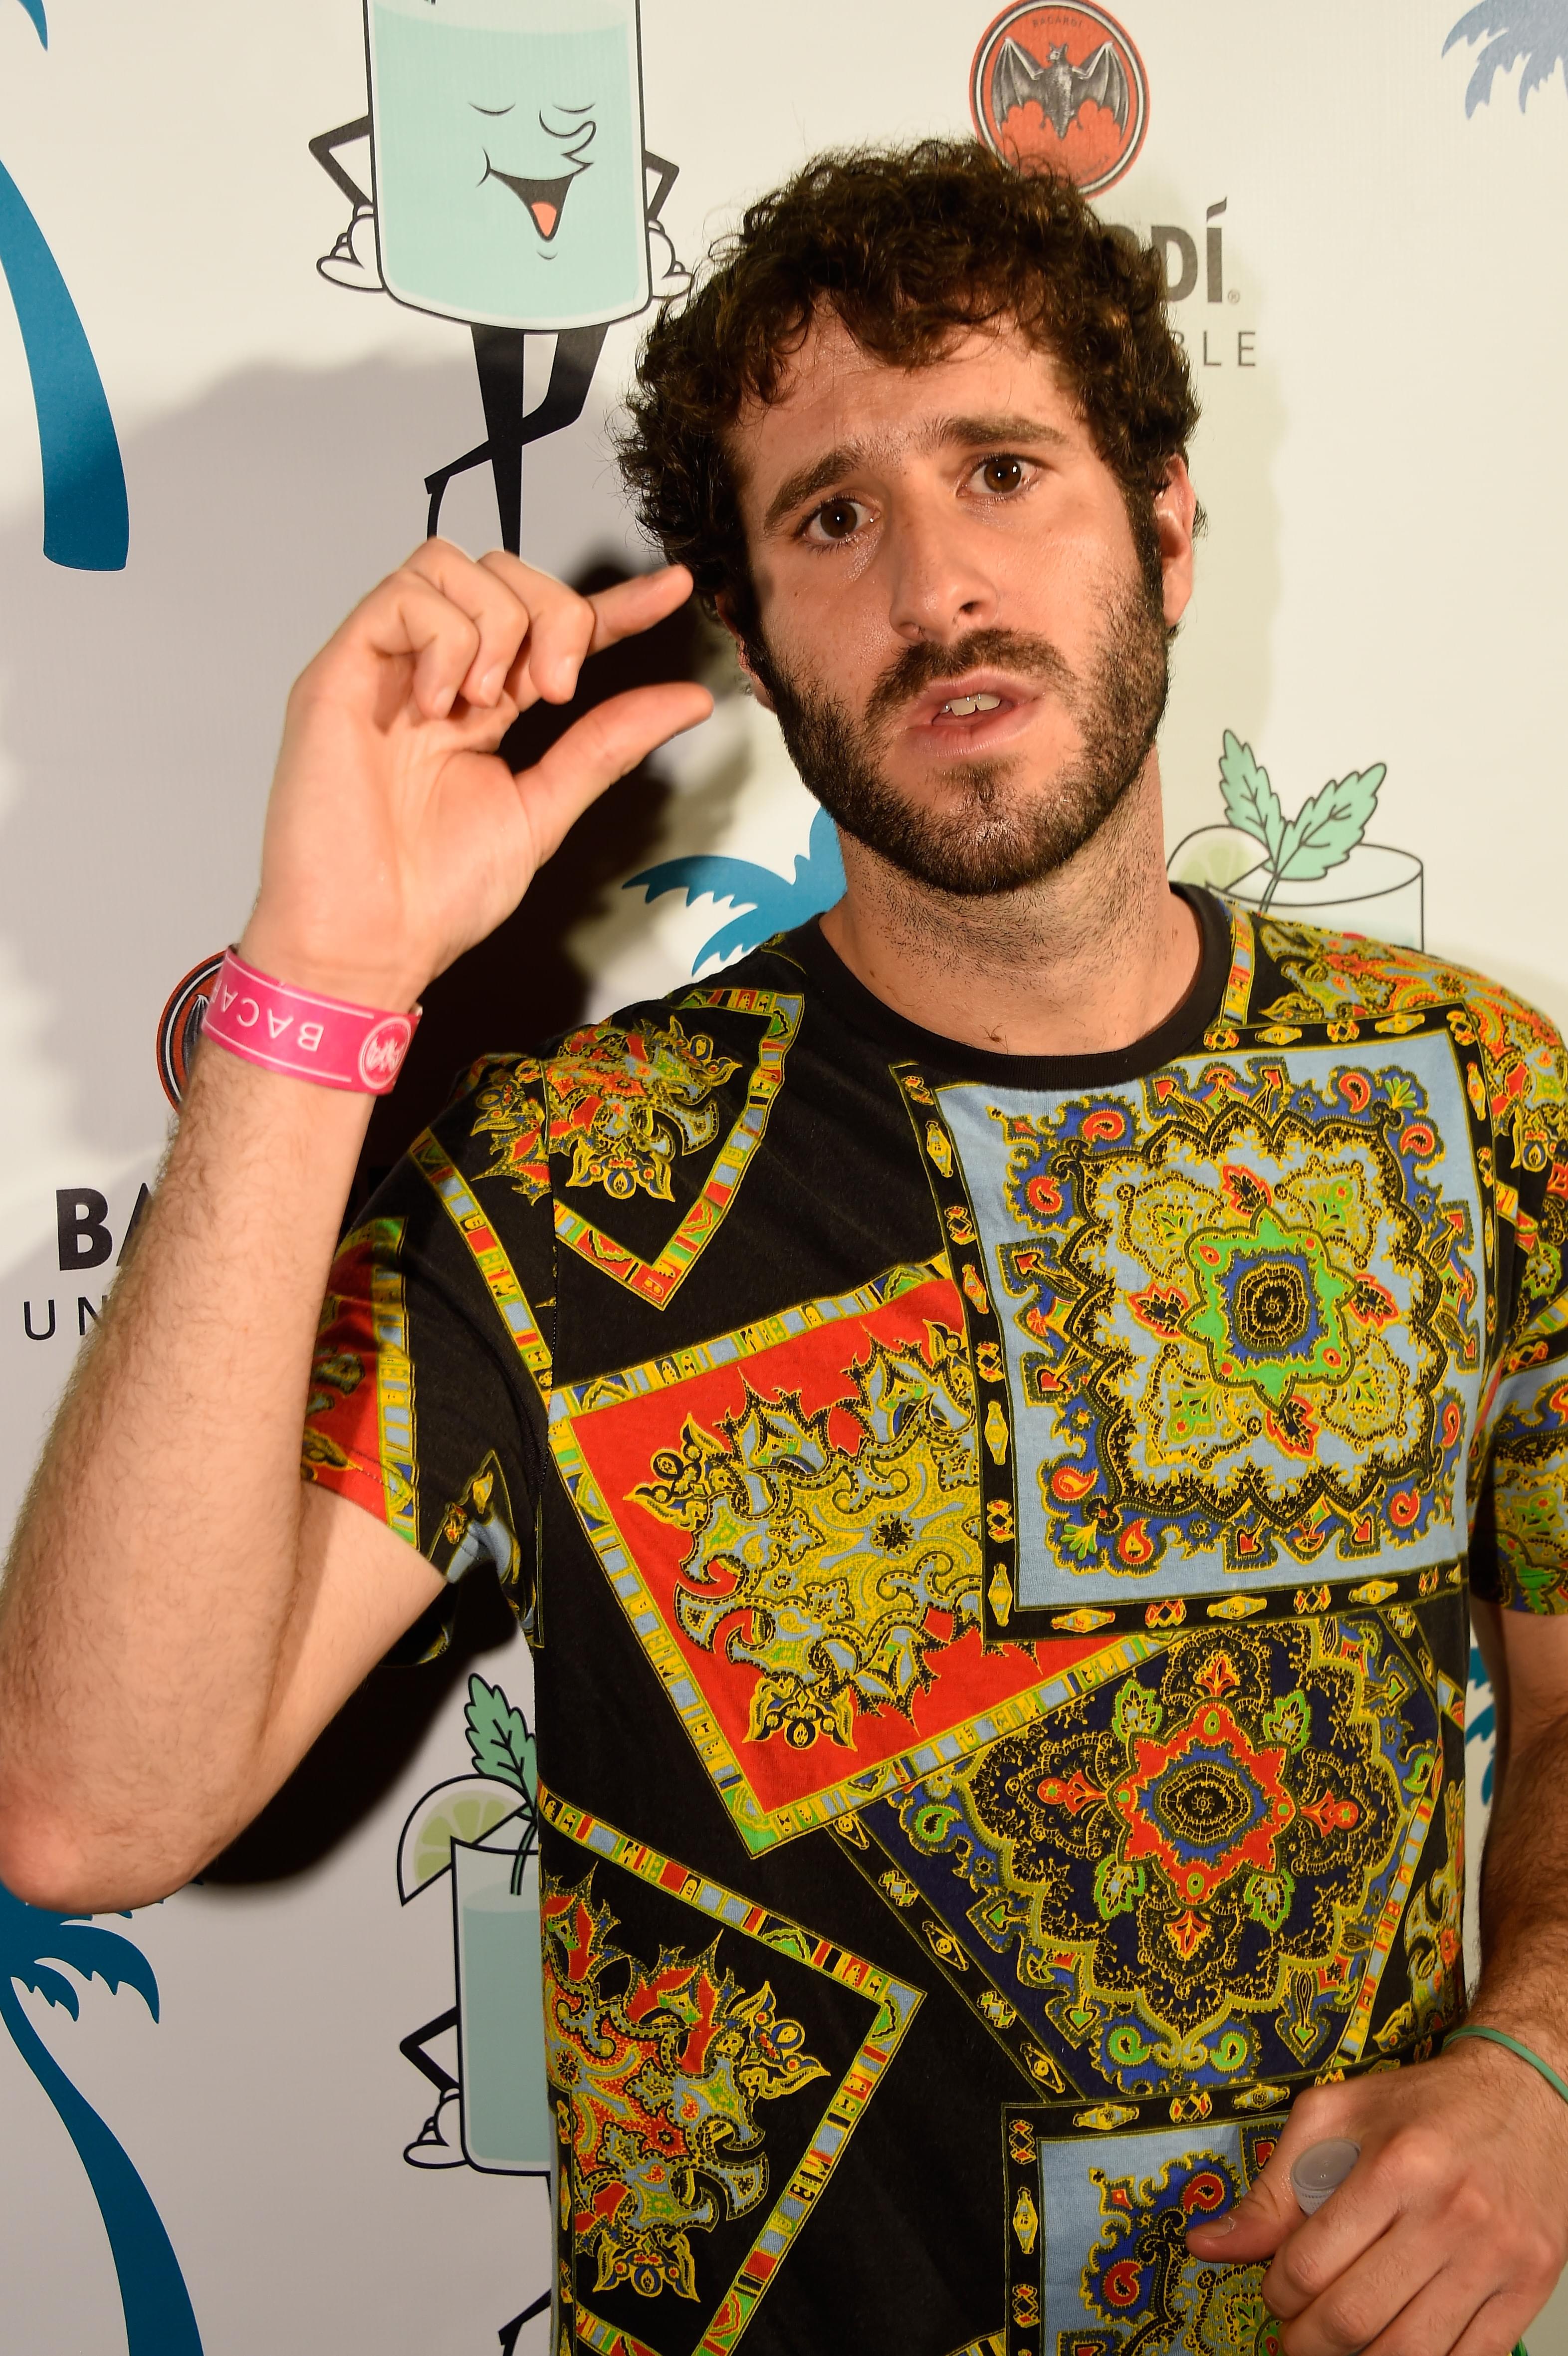 Get A Glimpse of The “Pillow Talking” Video That Lil Dicky Is Dropping Tomorrow [WATCH]